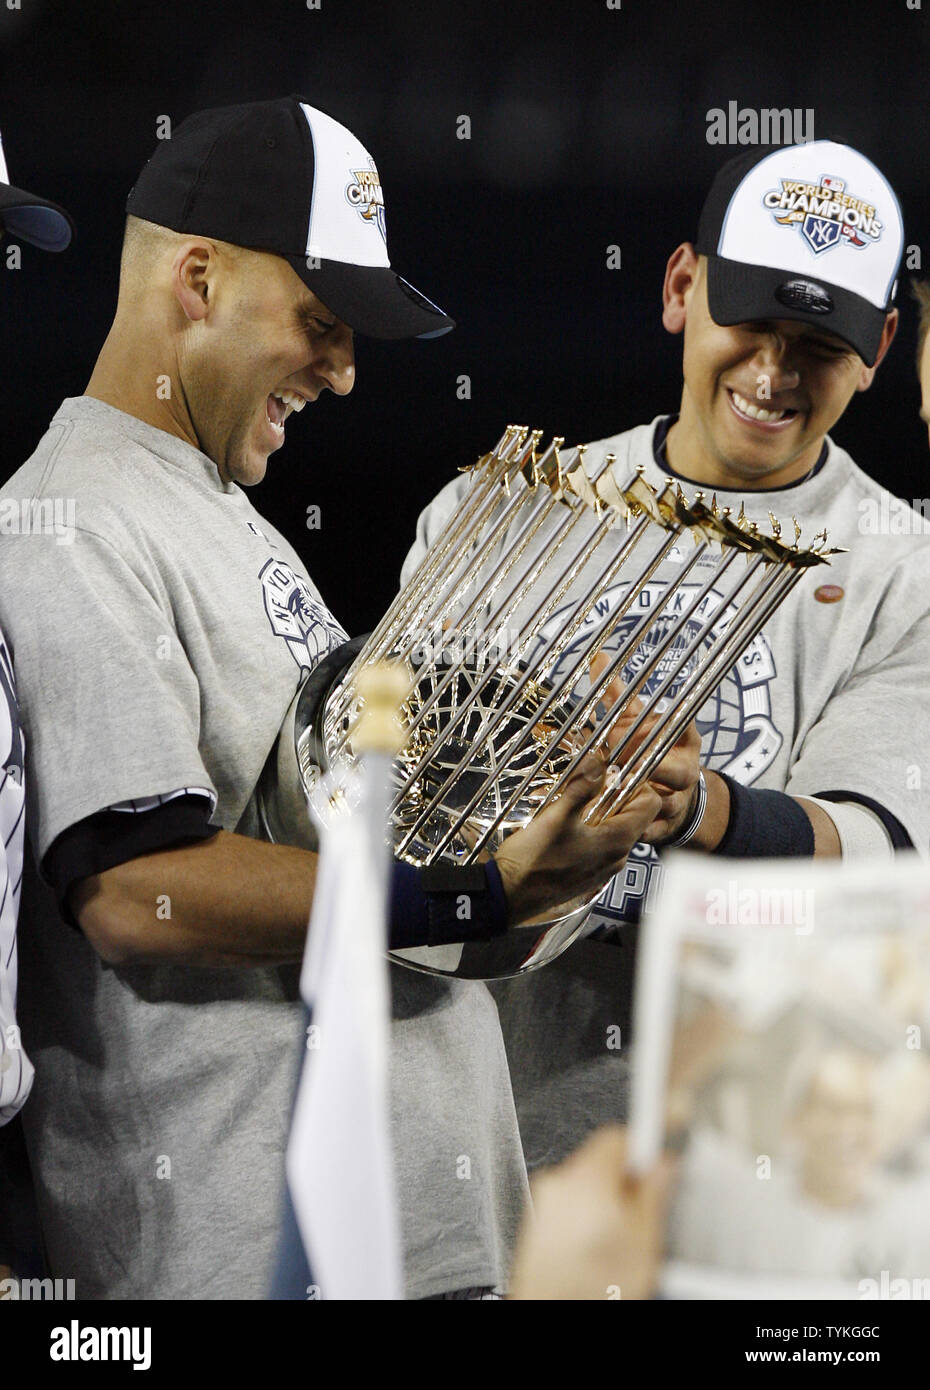 New York Yankees Alex Rodriguez and Derek Jeter react holding the MLB World  Series Trophy after the game against the Philadelphia Phillies in game 6 of  the World Series at Yankee Stadium